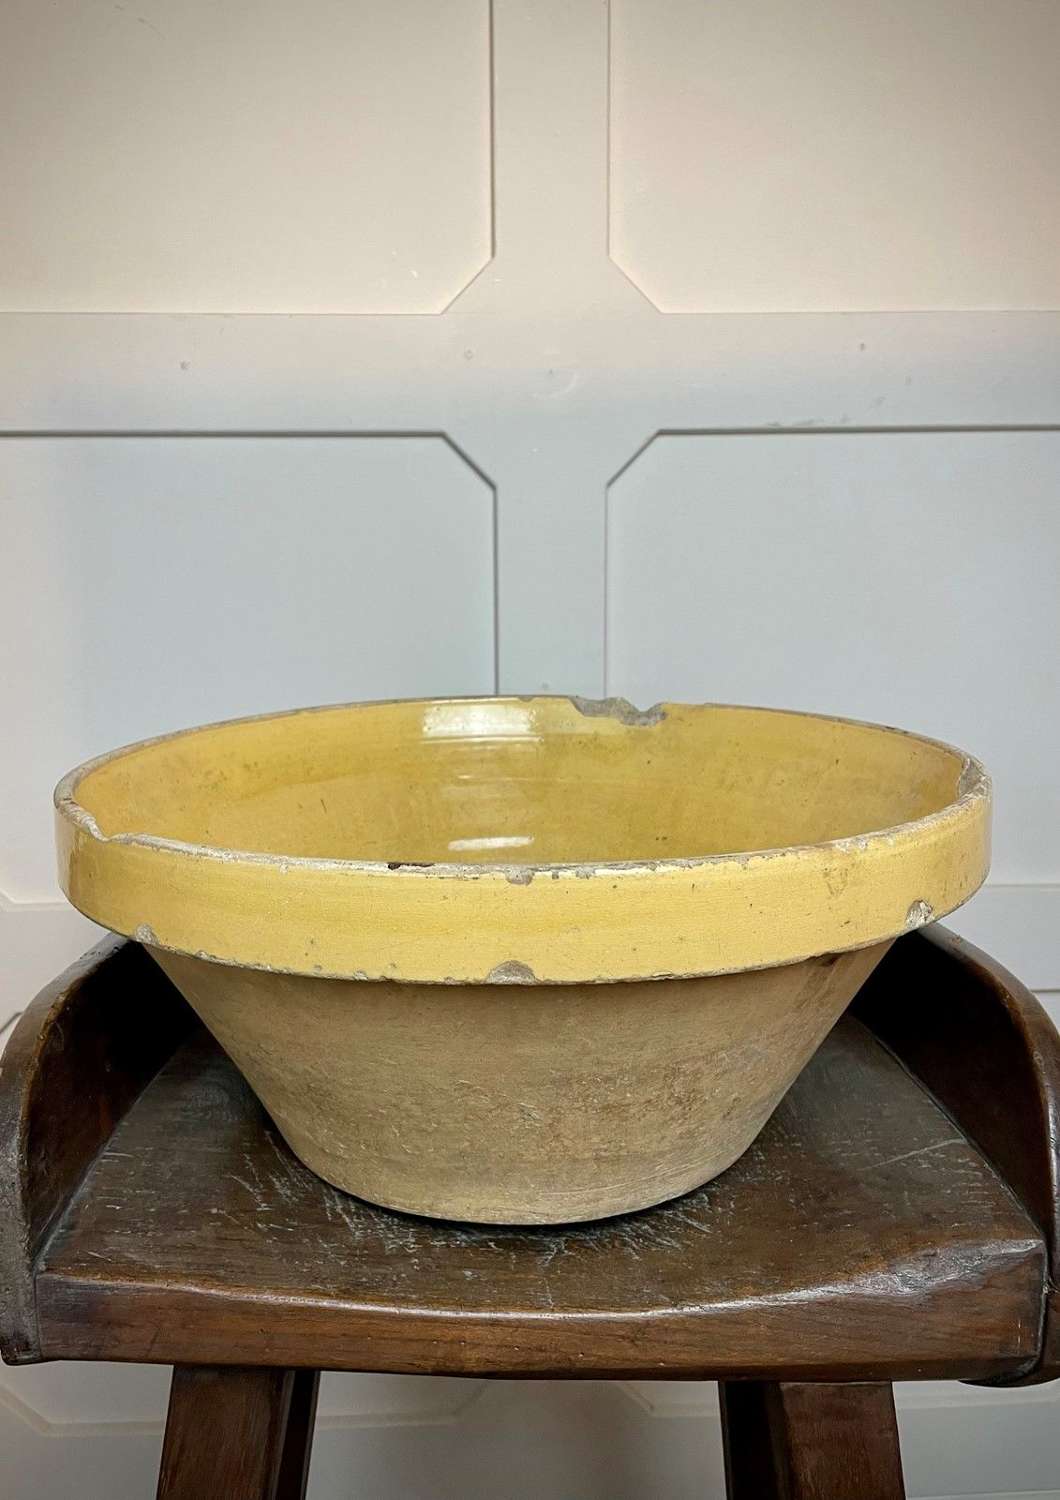 19c Large French Dairy Bowl